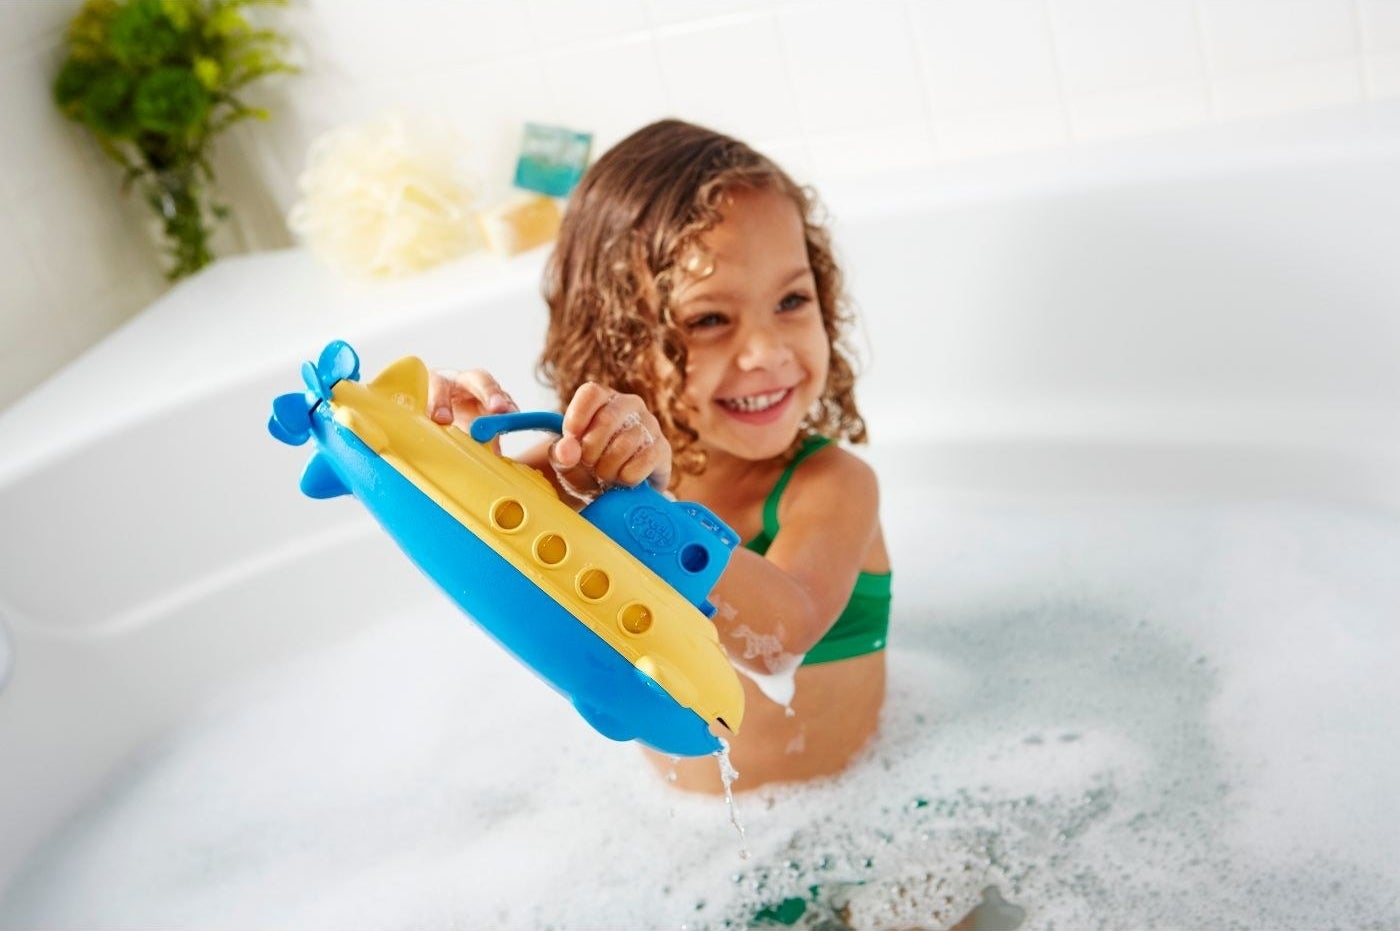 child in tub playing with yellow submarine